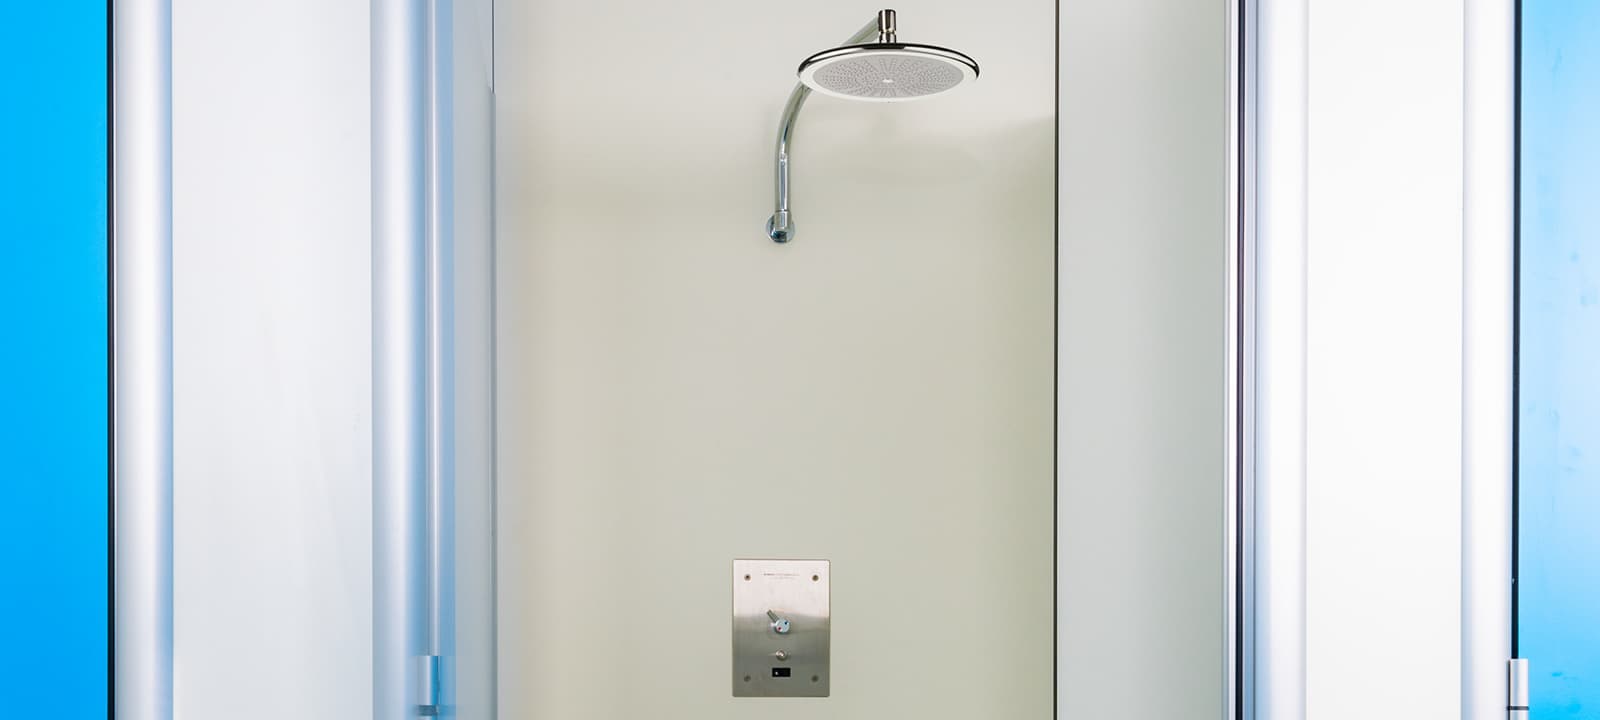 Electronic shower controls and obliged passages